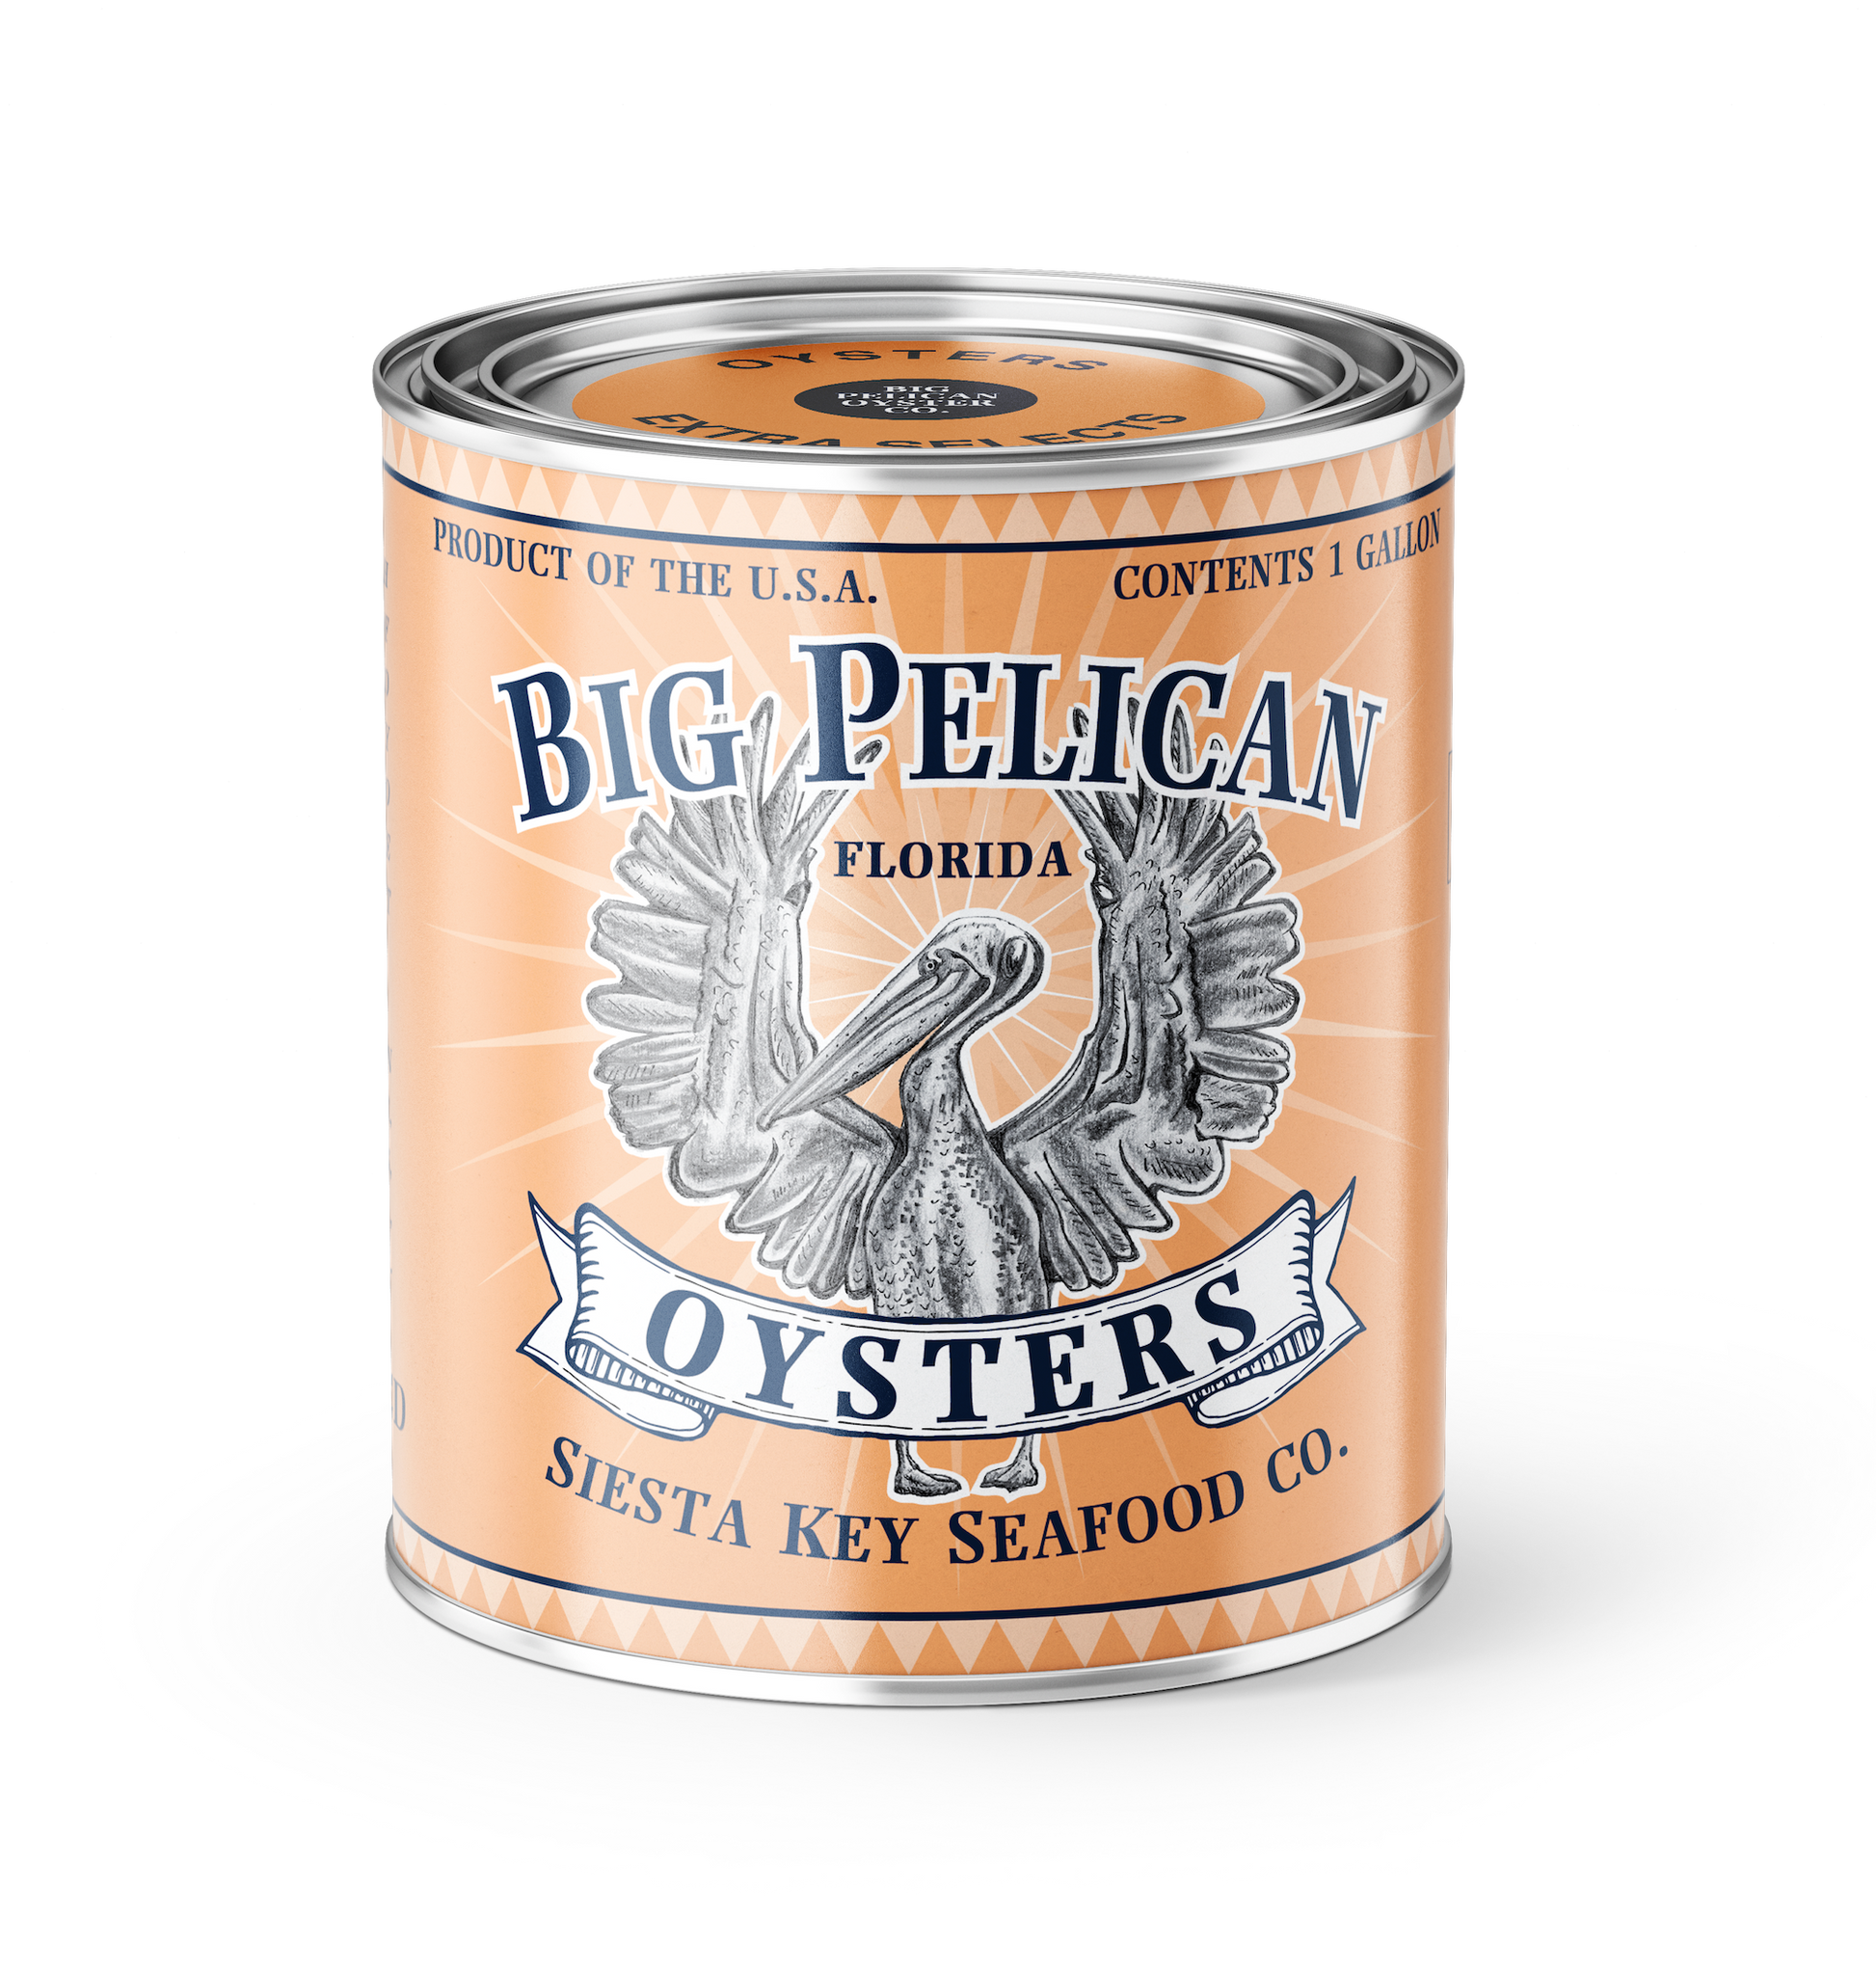 Vintage Big Pelican Oyster Candle